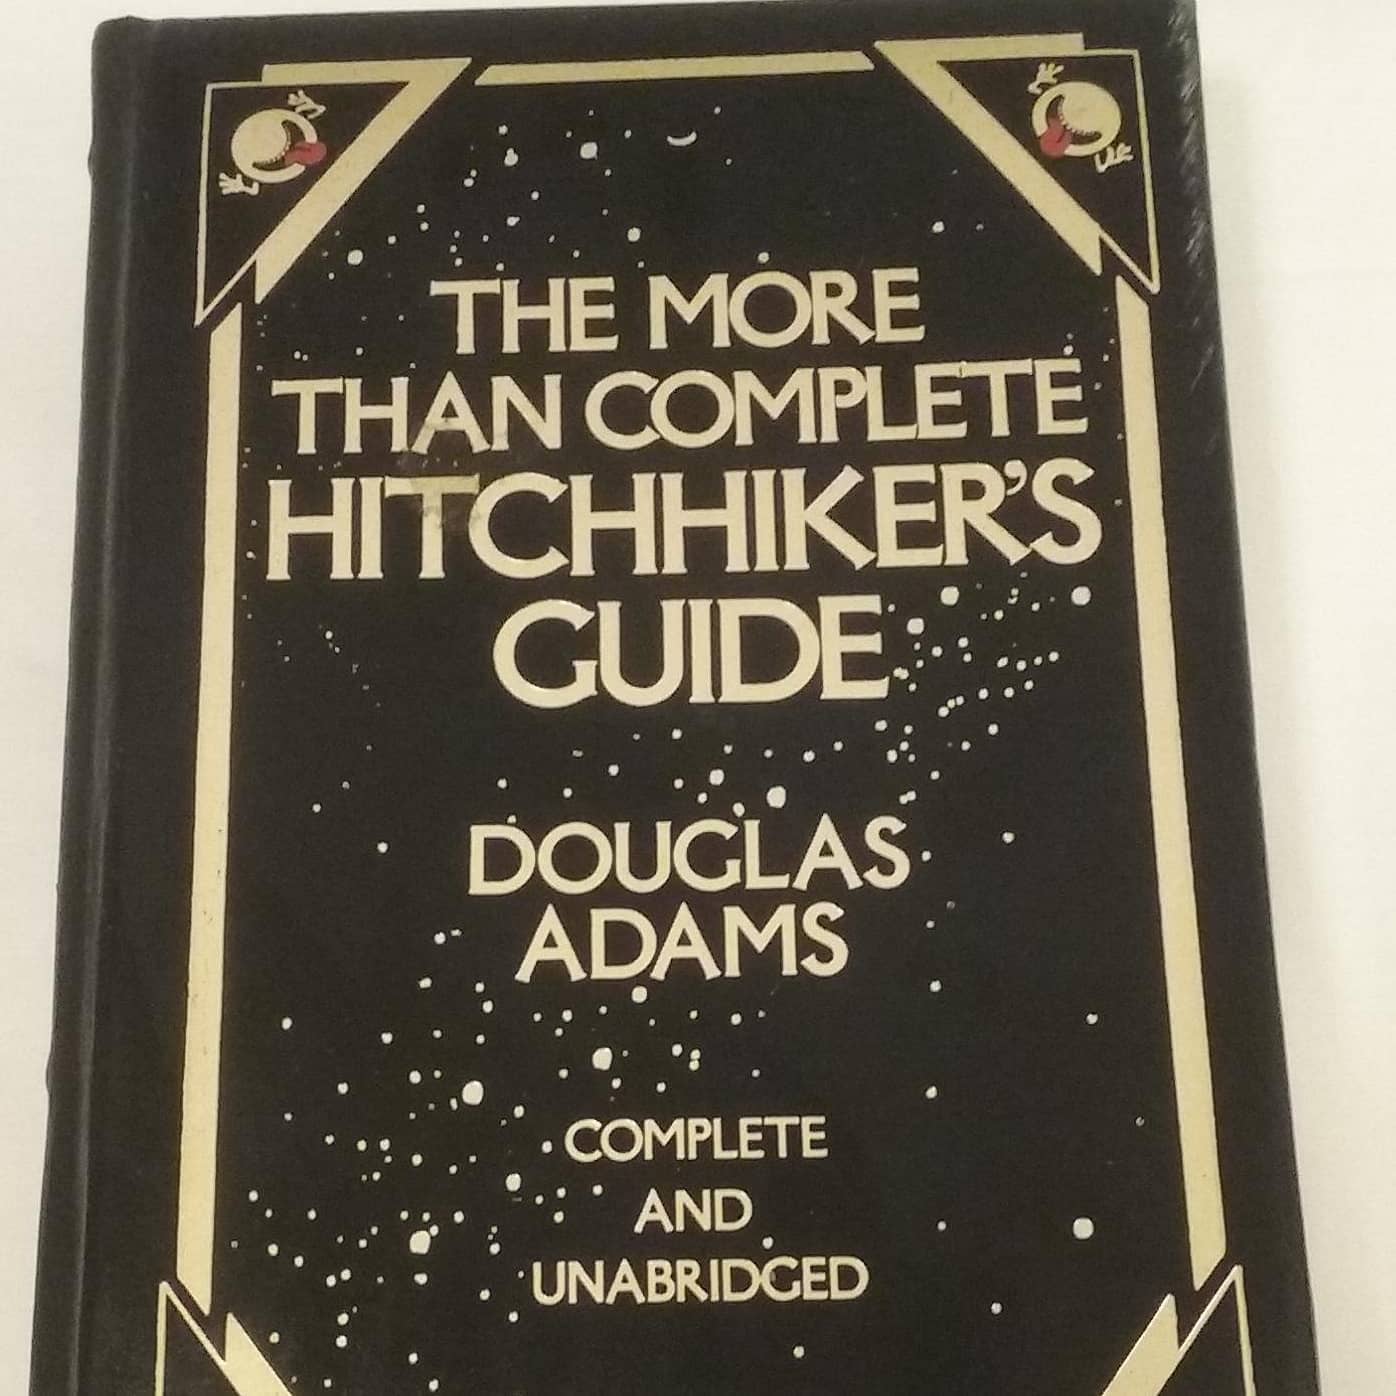 The Ultimate Hitchhiker’s Guide 5